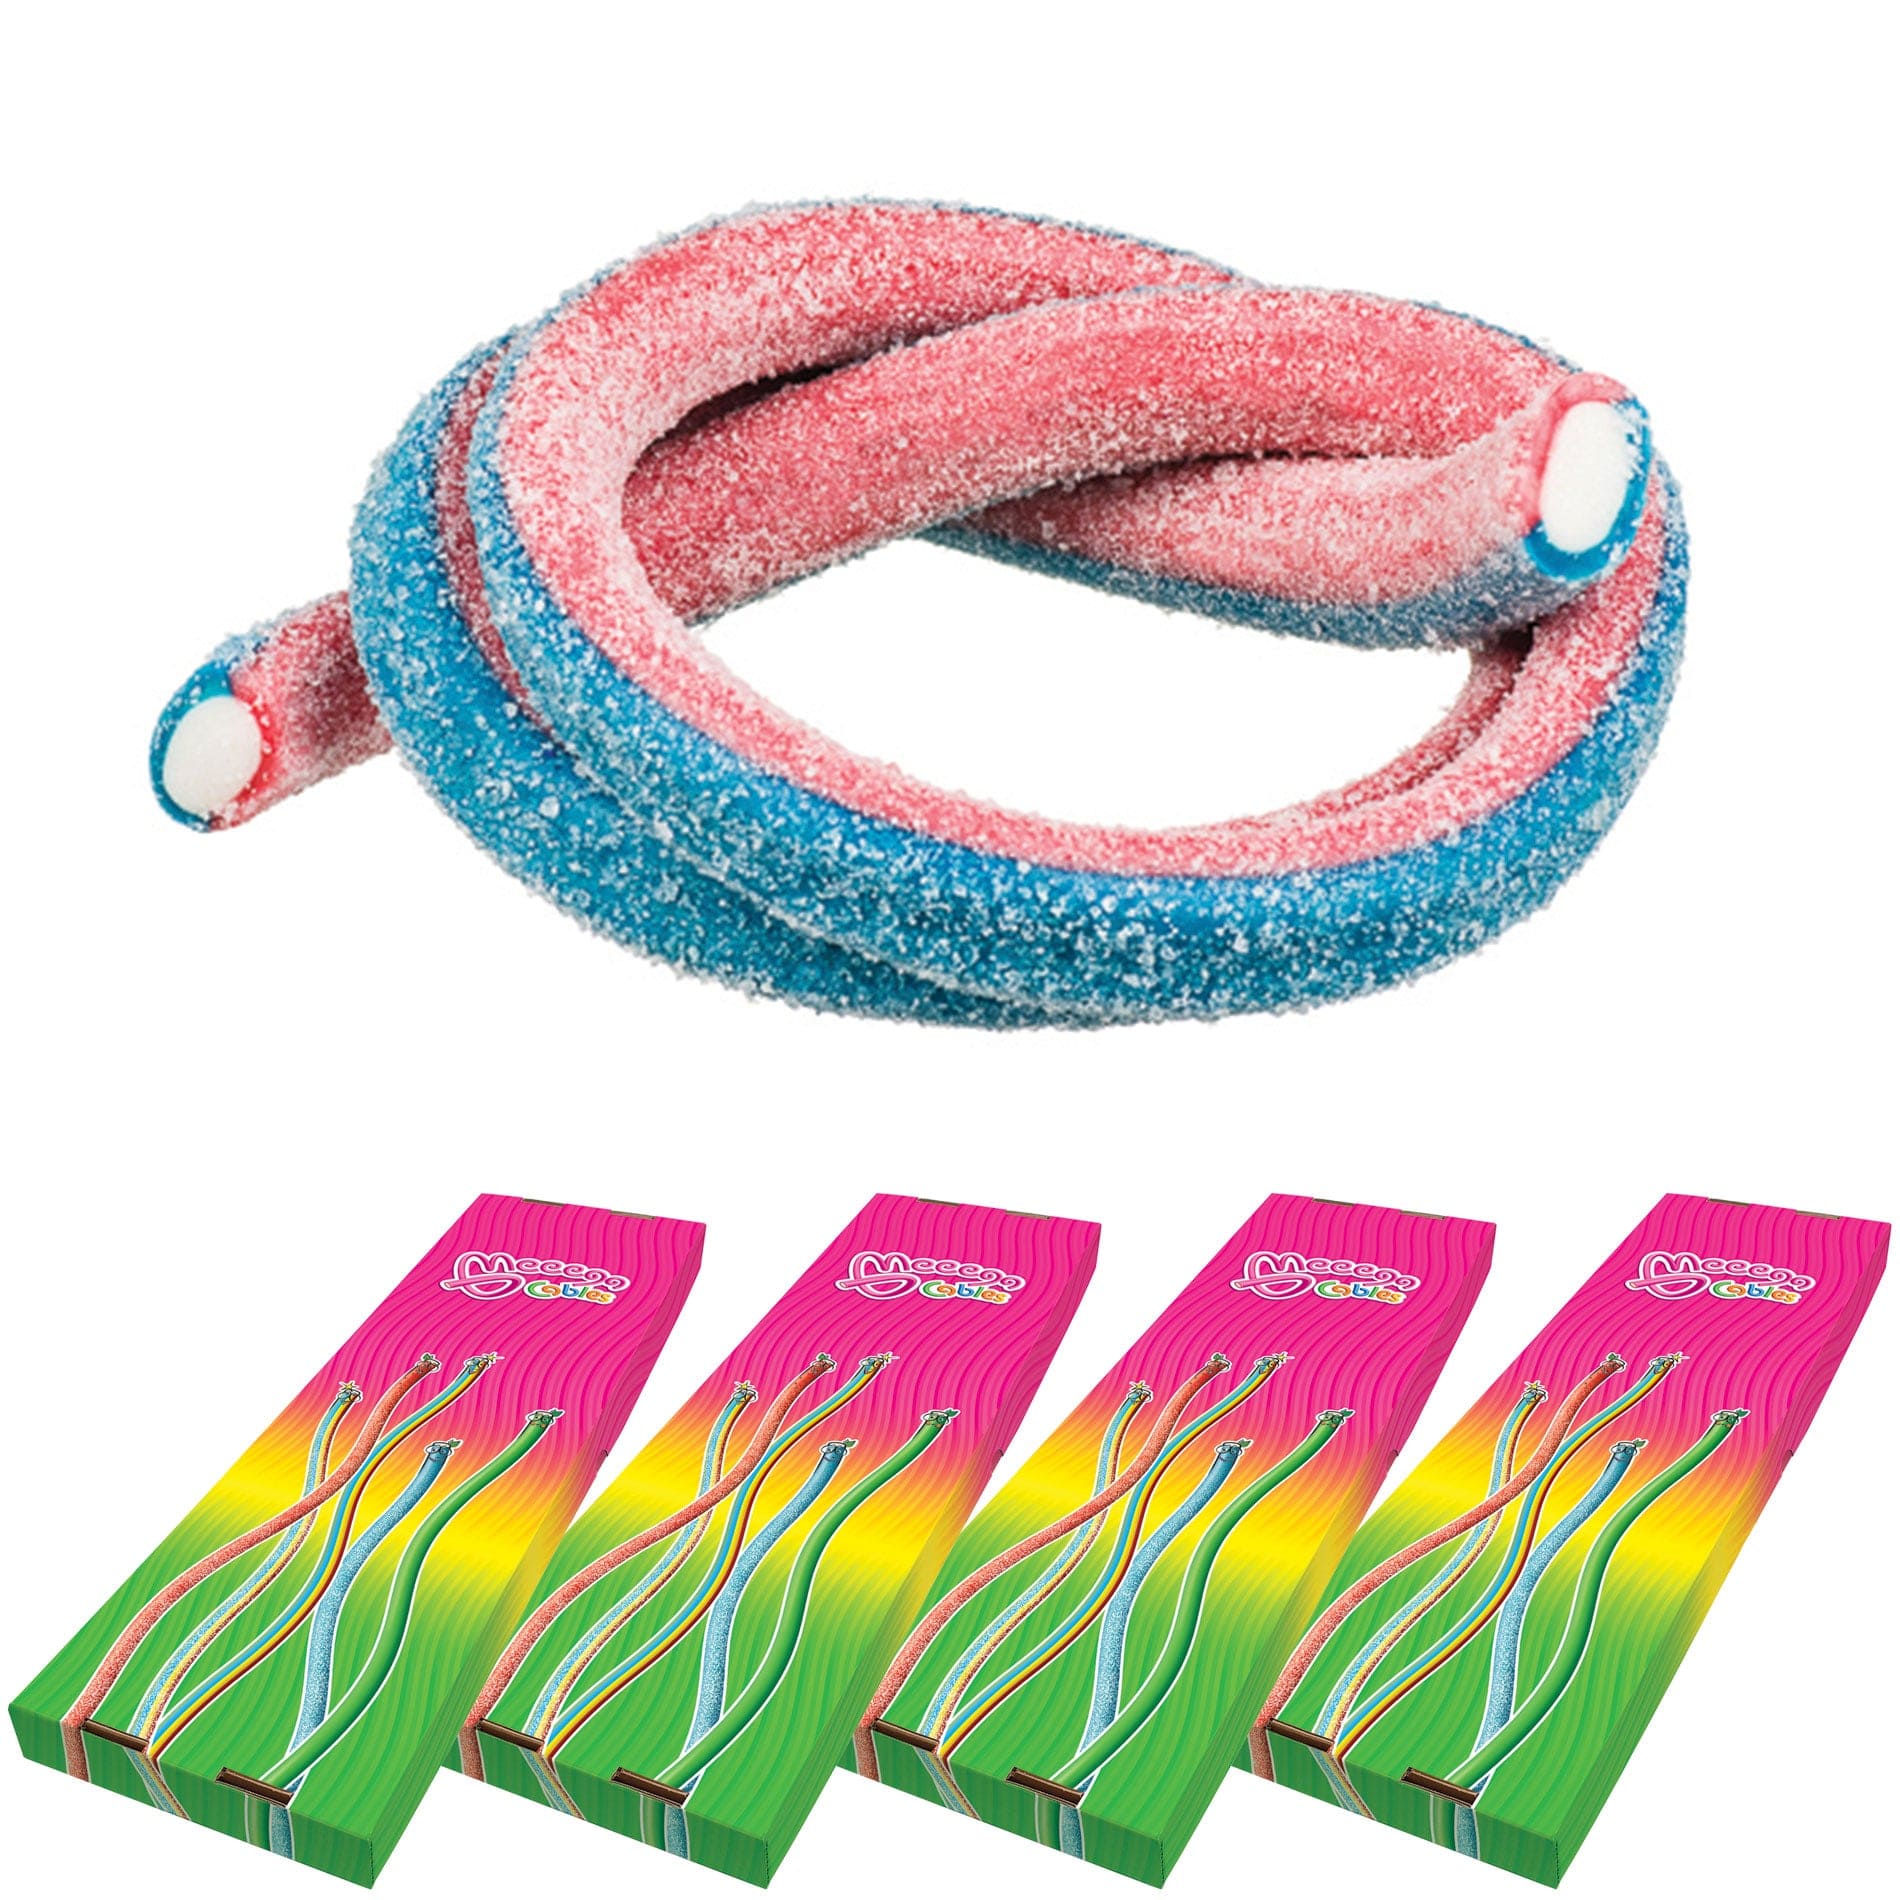 Novelty Concessions Gummy Rope SOUR BLUEBERRY STRAWBERRY / 4 Pack (120 pieces) Meeega Cables European Chewy Rope Candy - Box of 30 individually wrapped Meeega Cables, each over 2-feet long cups with lids and straws